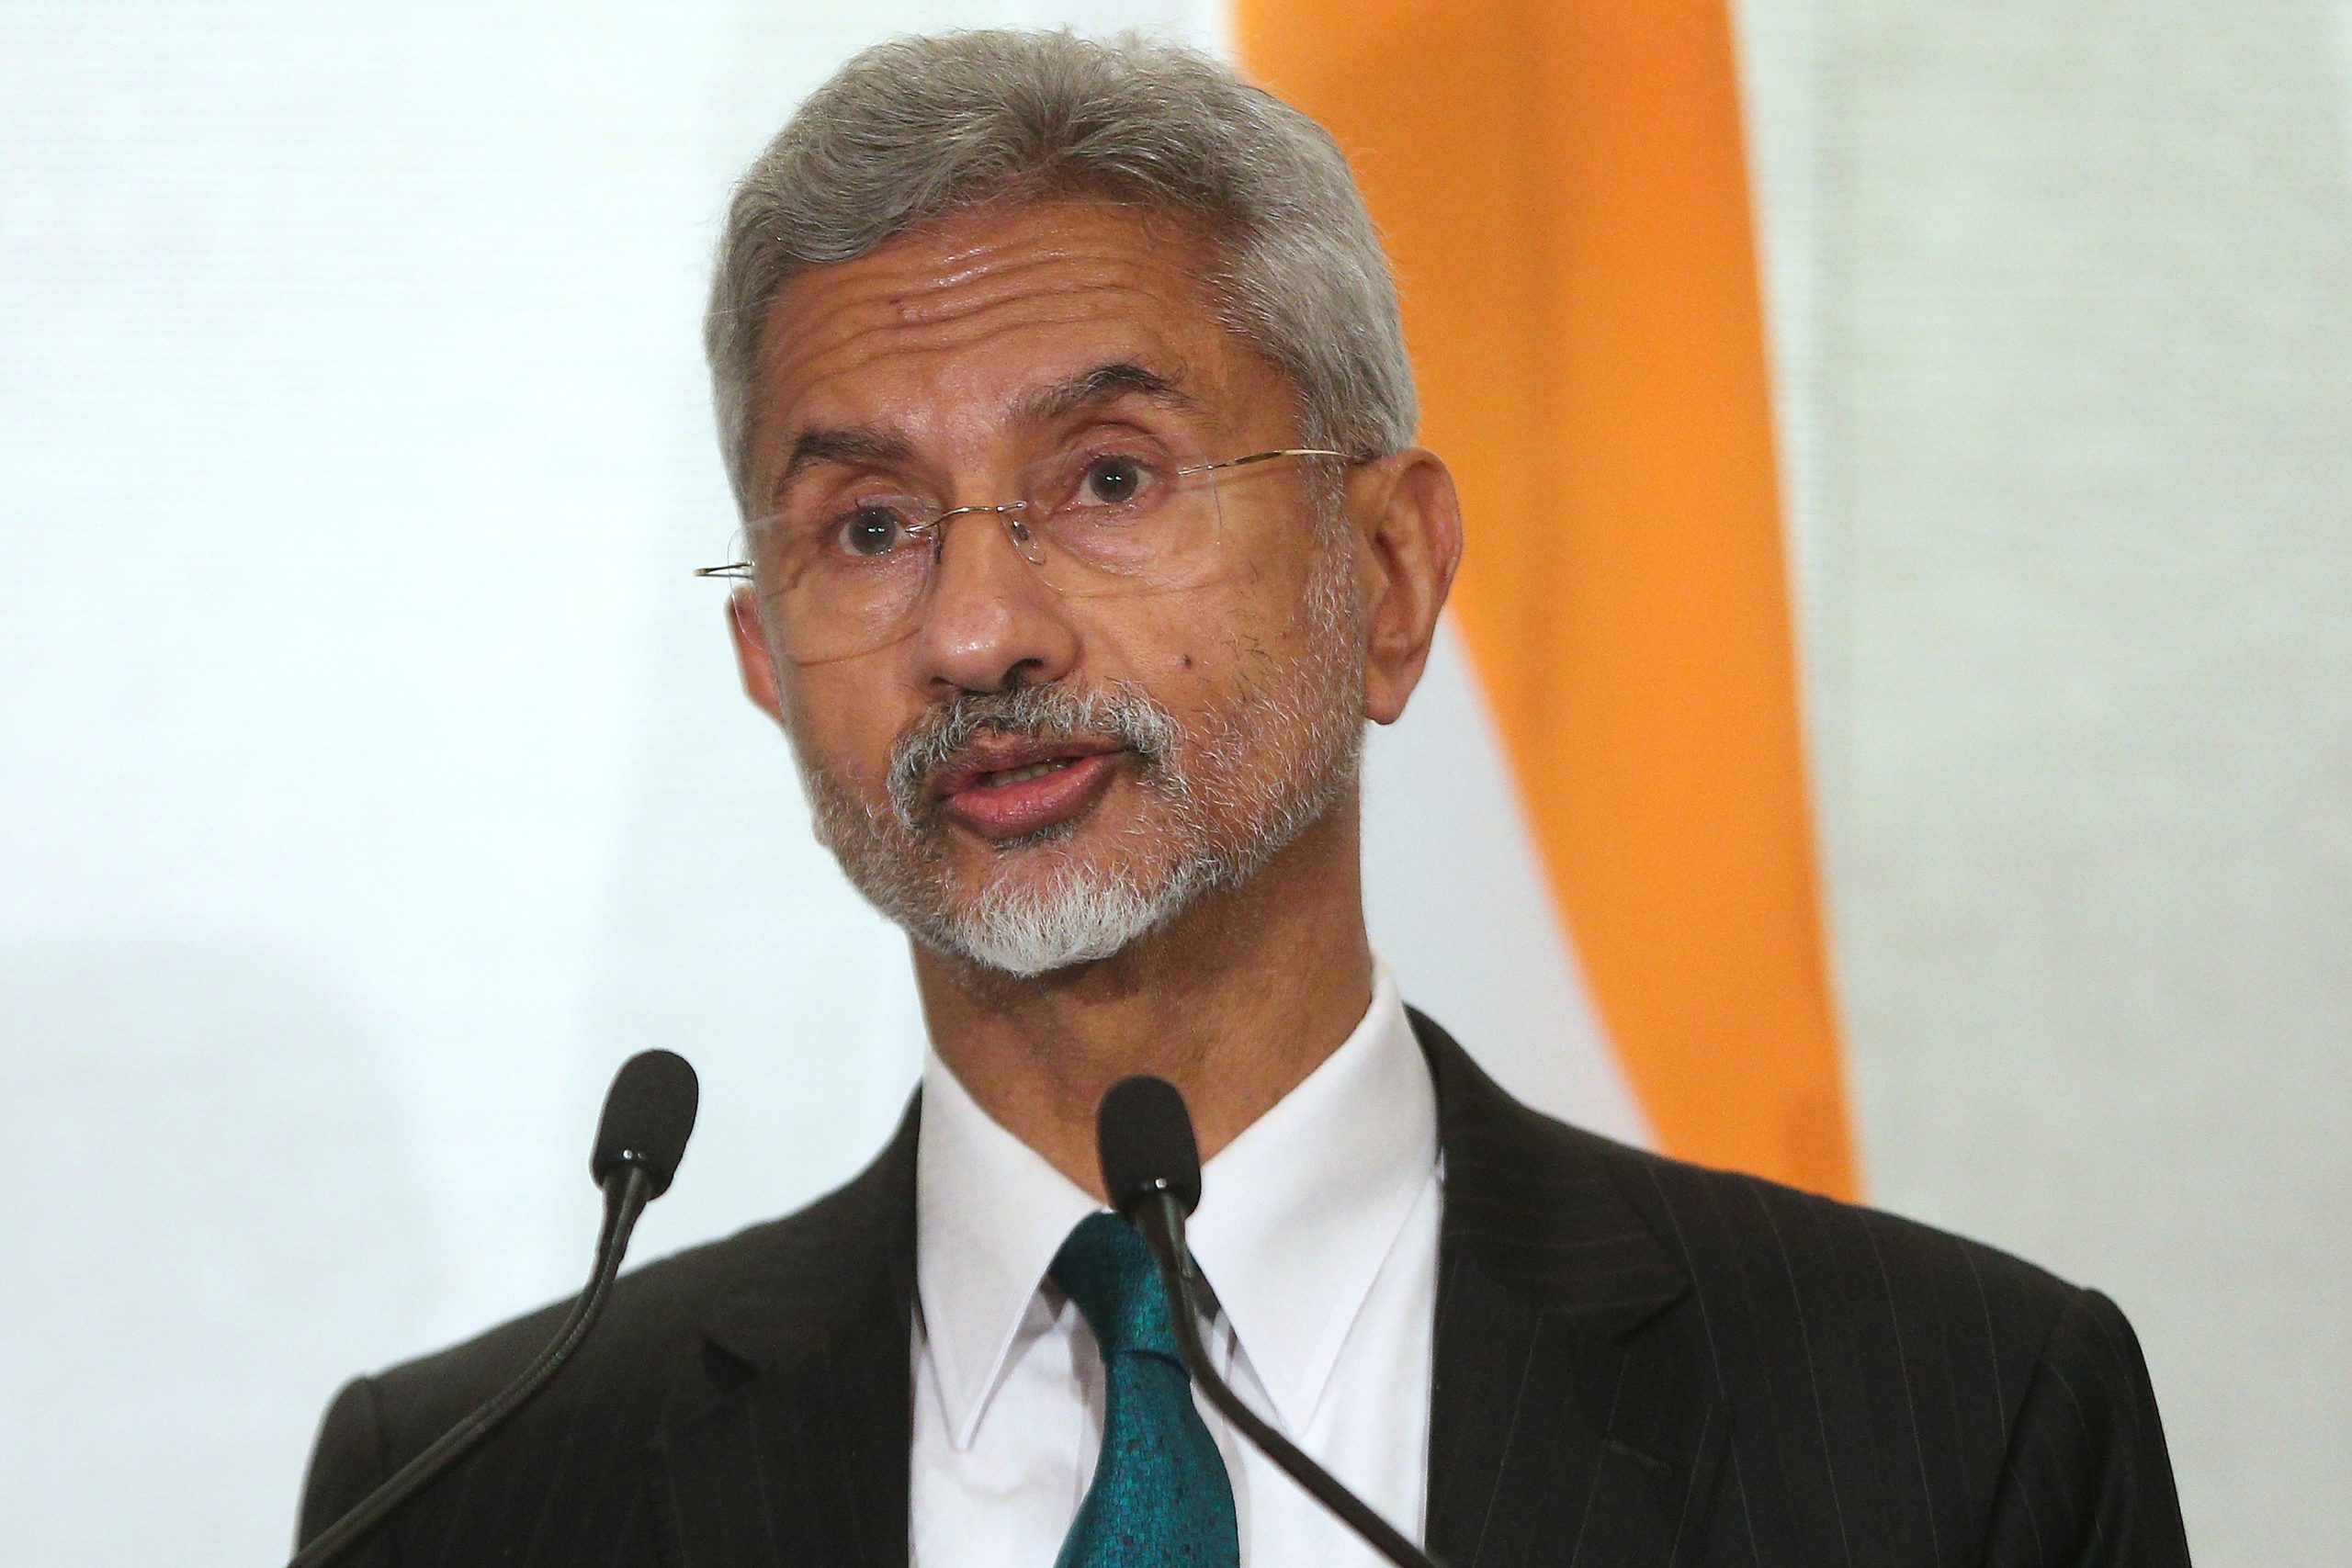 Ukraine crisis rooted in post-Soviet politics, NATO expansion: Indian minister